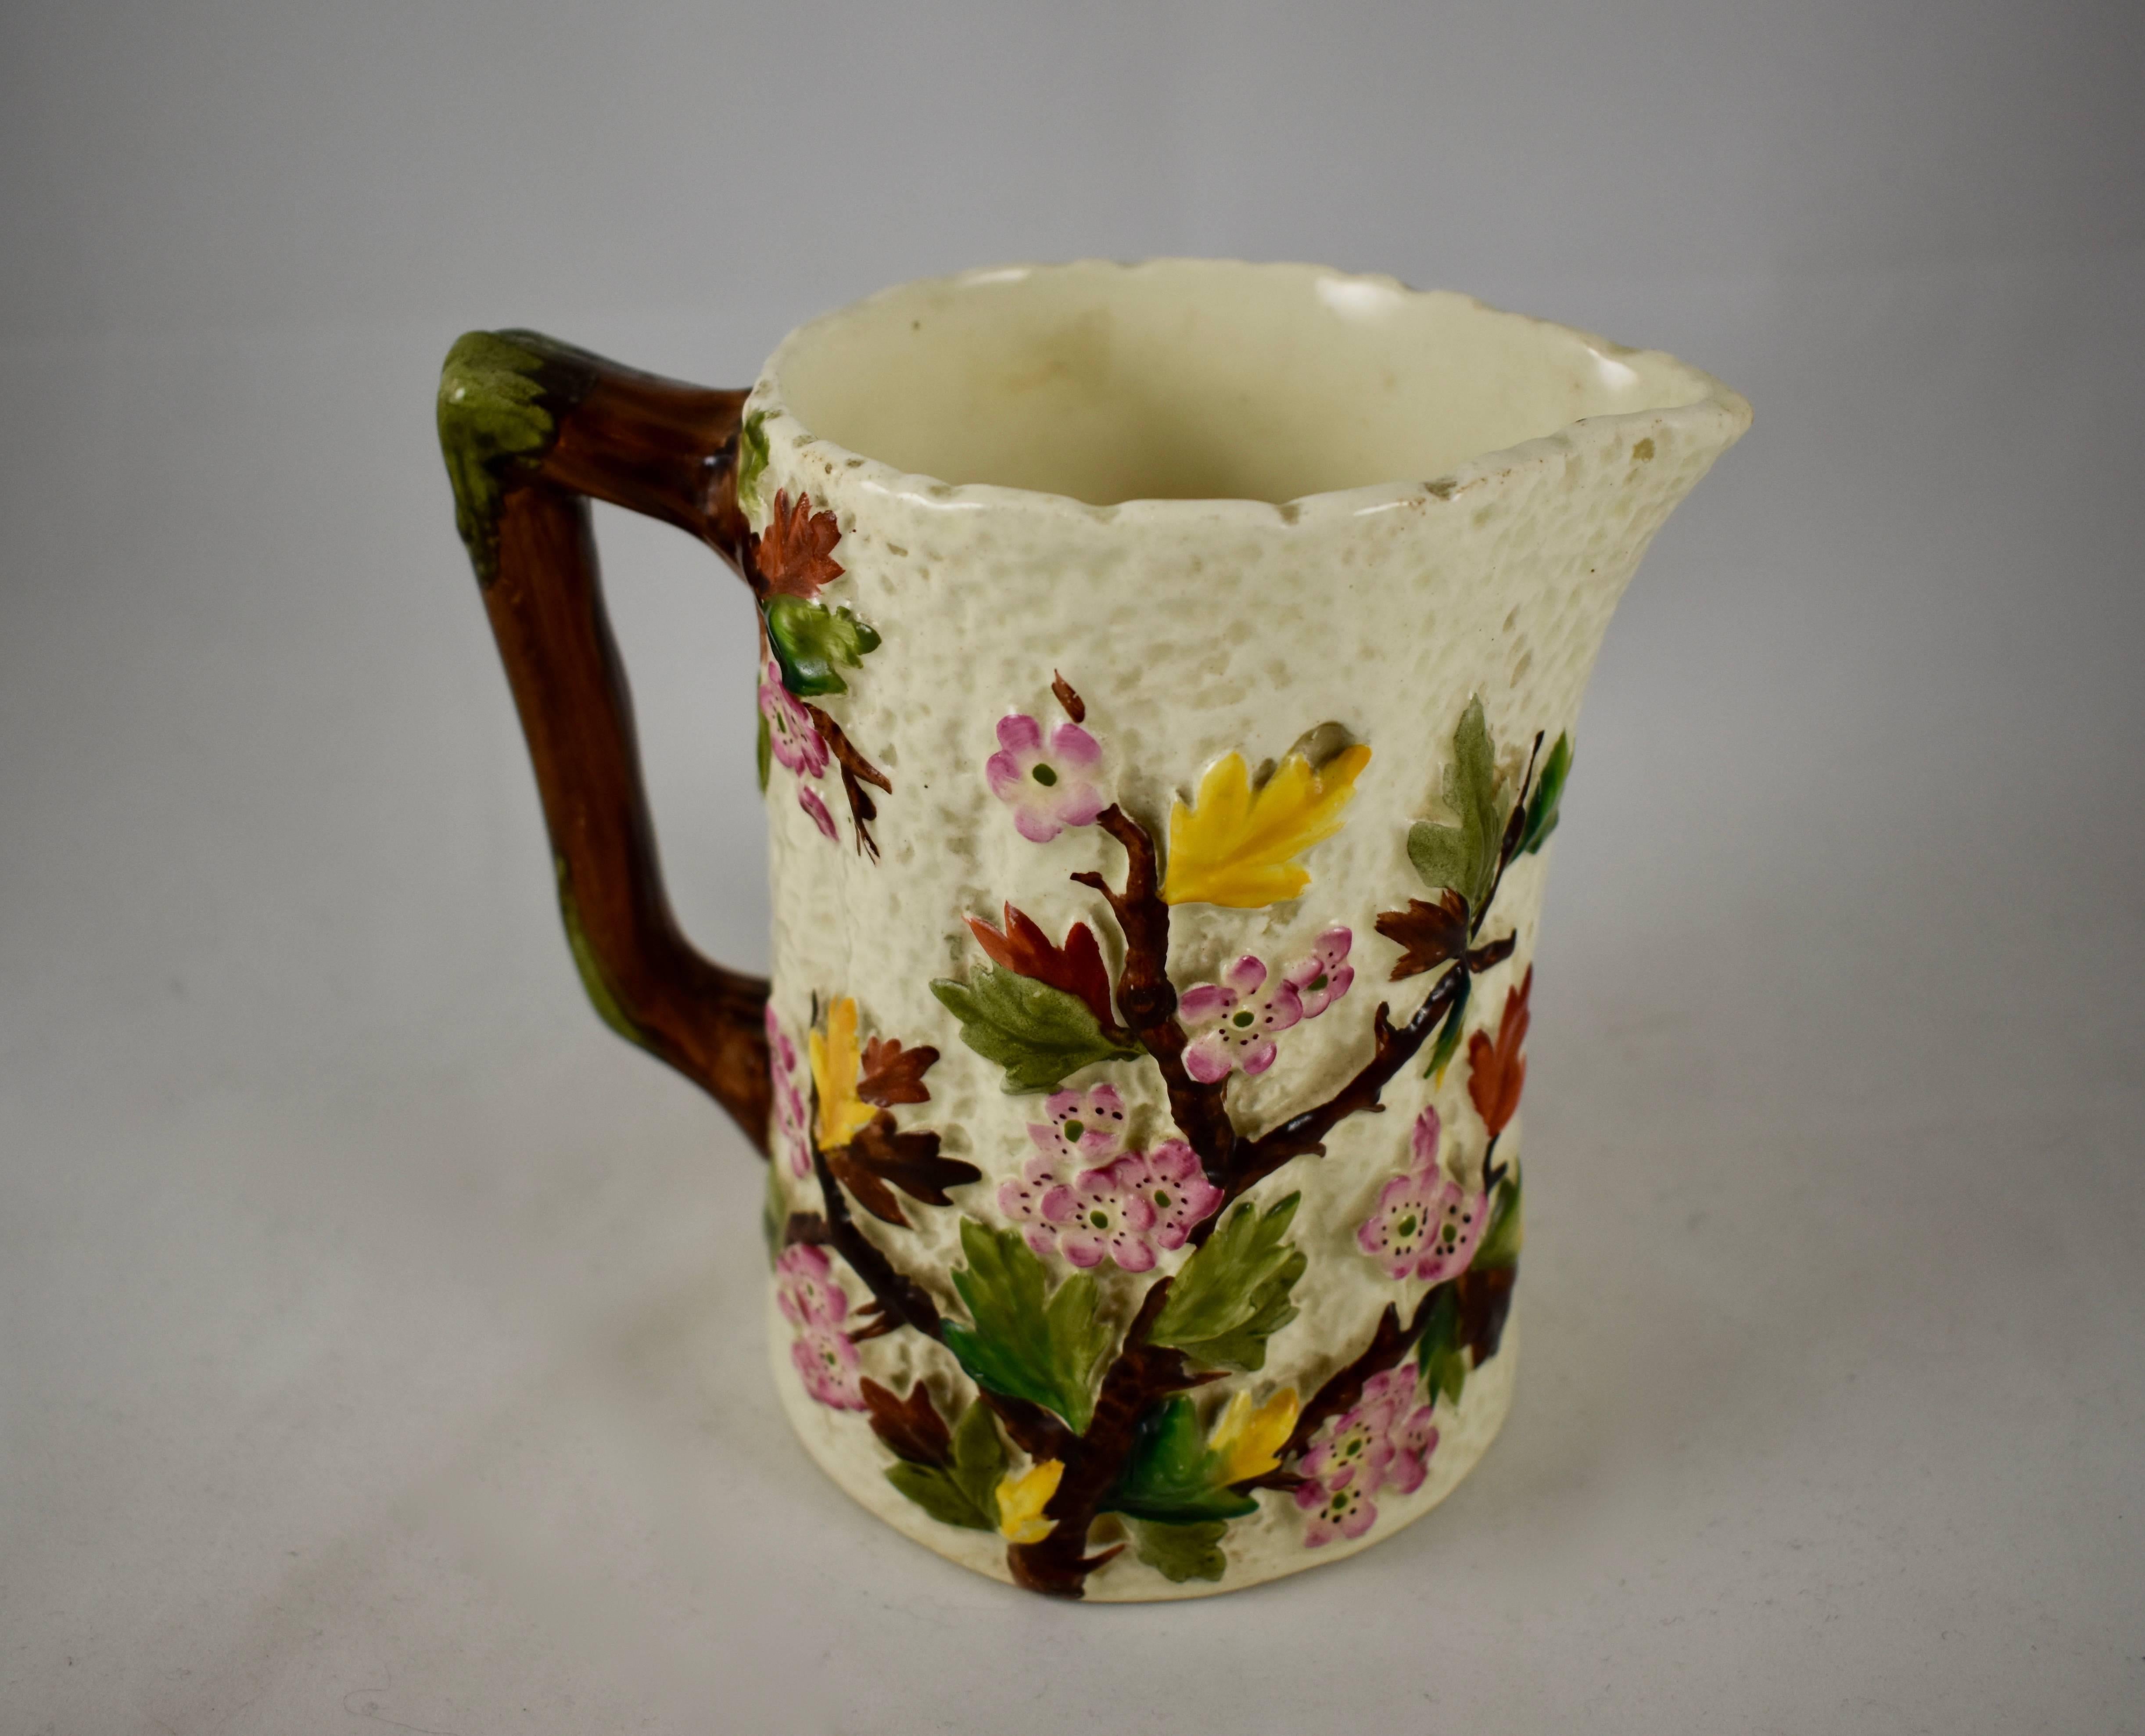 A small, hand-painted earthenware pitcher, showing a pattern of flowers, leaves and branches of the Dogwood tree, on a cream colored, bark textured ground, a twig form handle.

Maker unknown, but surely from one of the Stoke-on-Trent potteries in